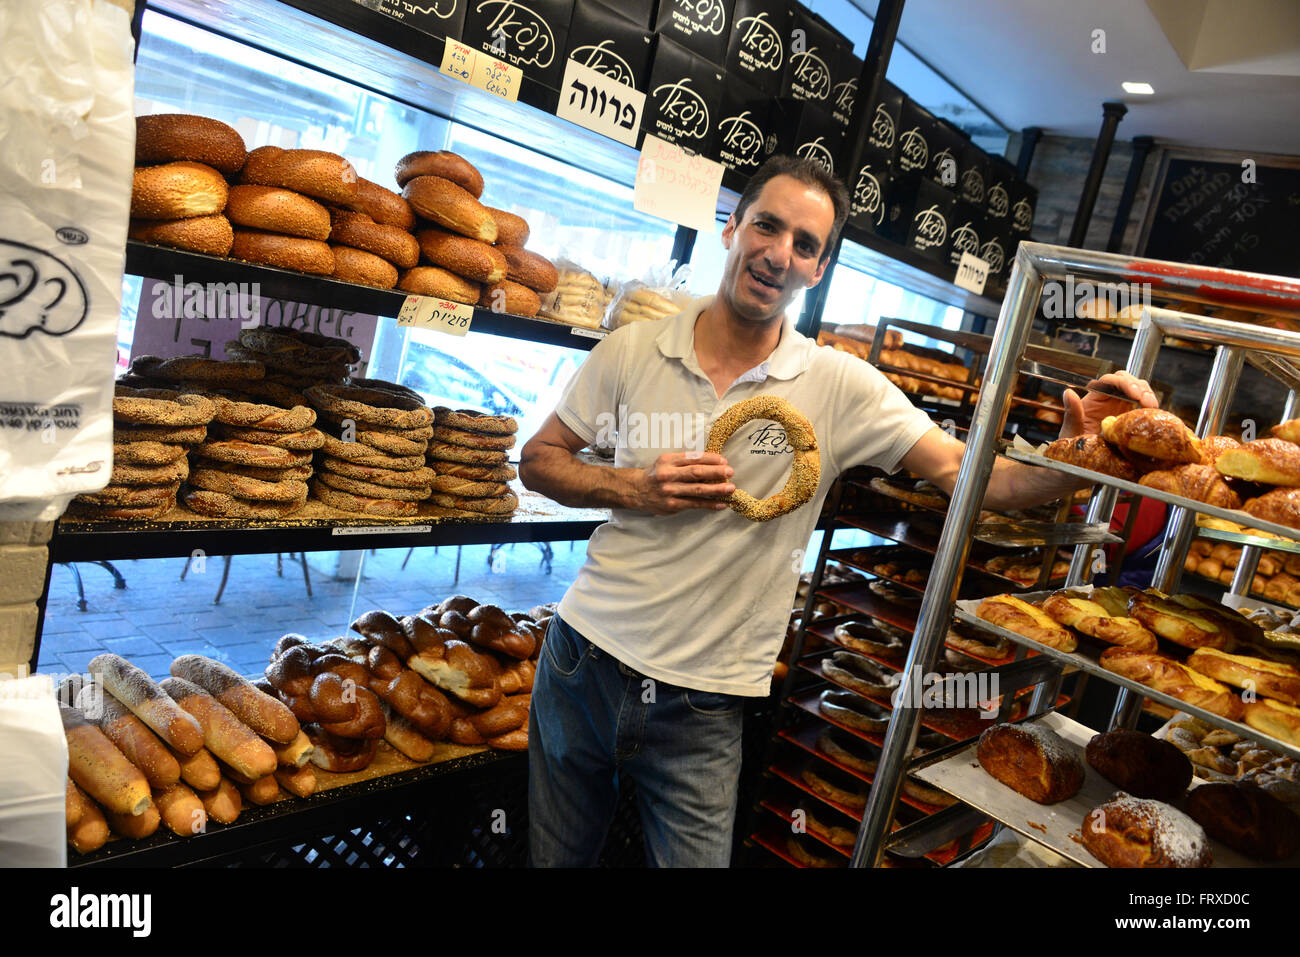 Shopping: Different types of bread in a bakers, Tel Aviv, Israel Stock Photo